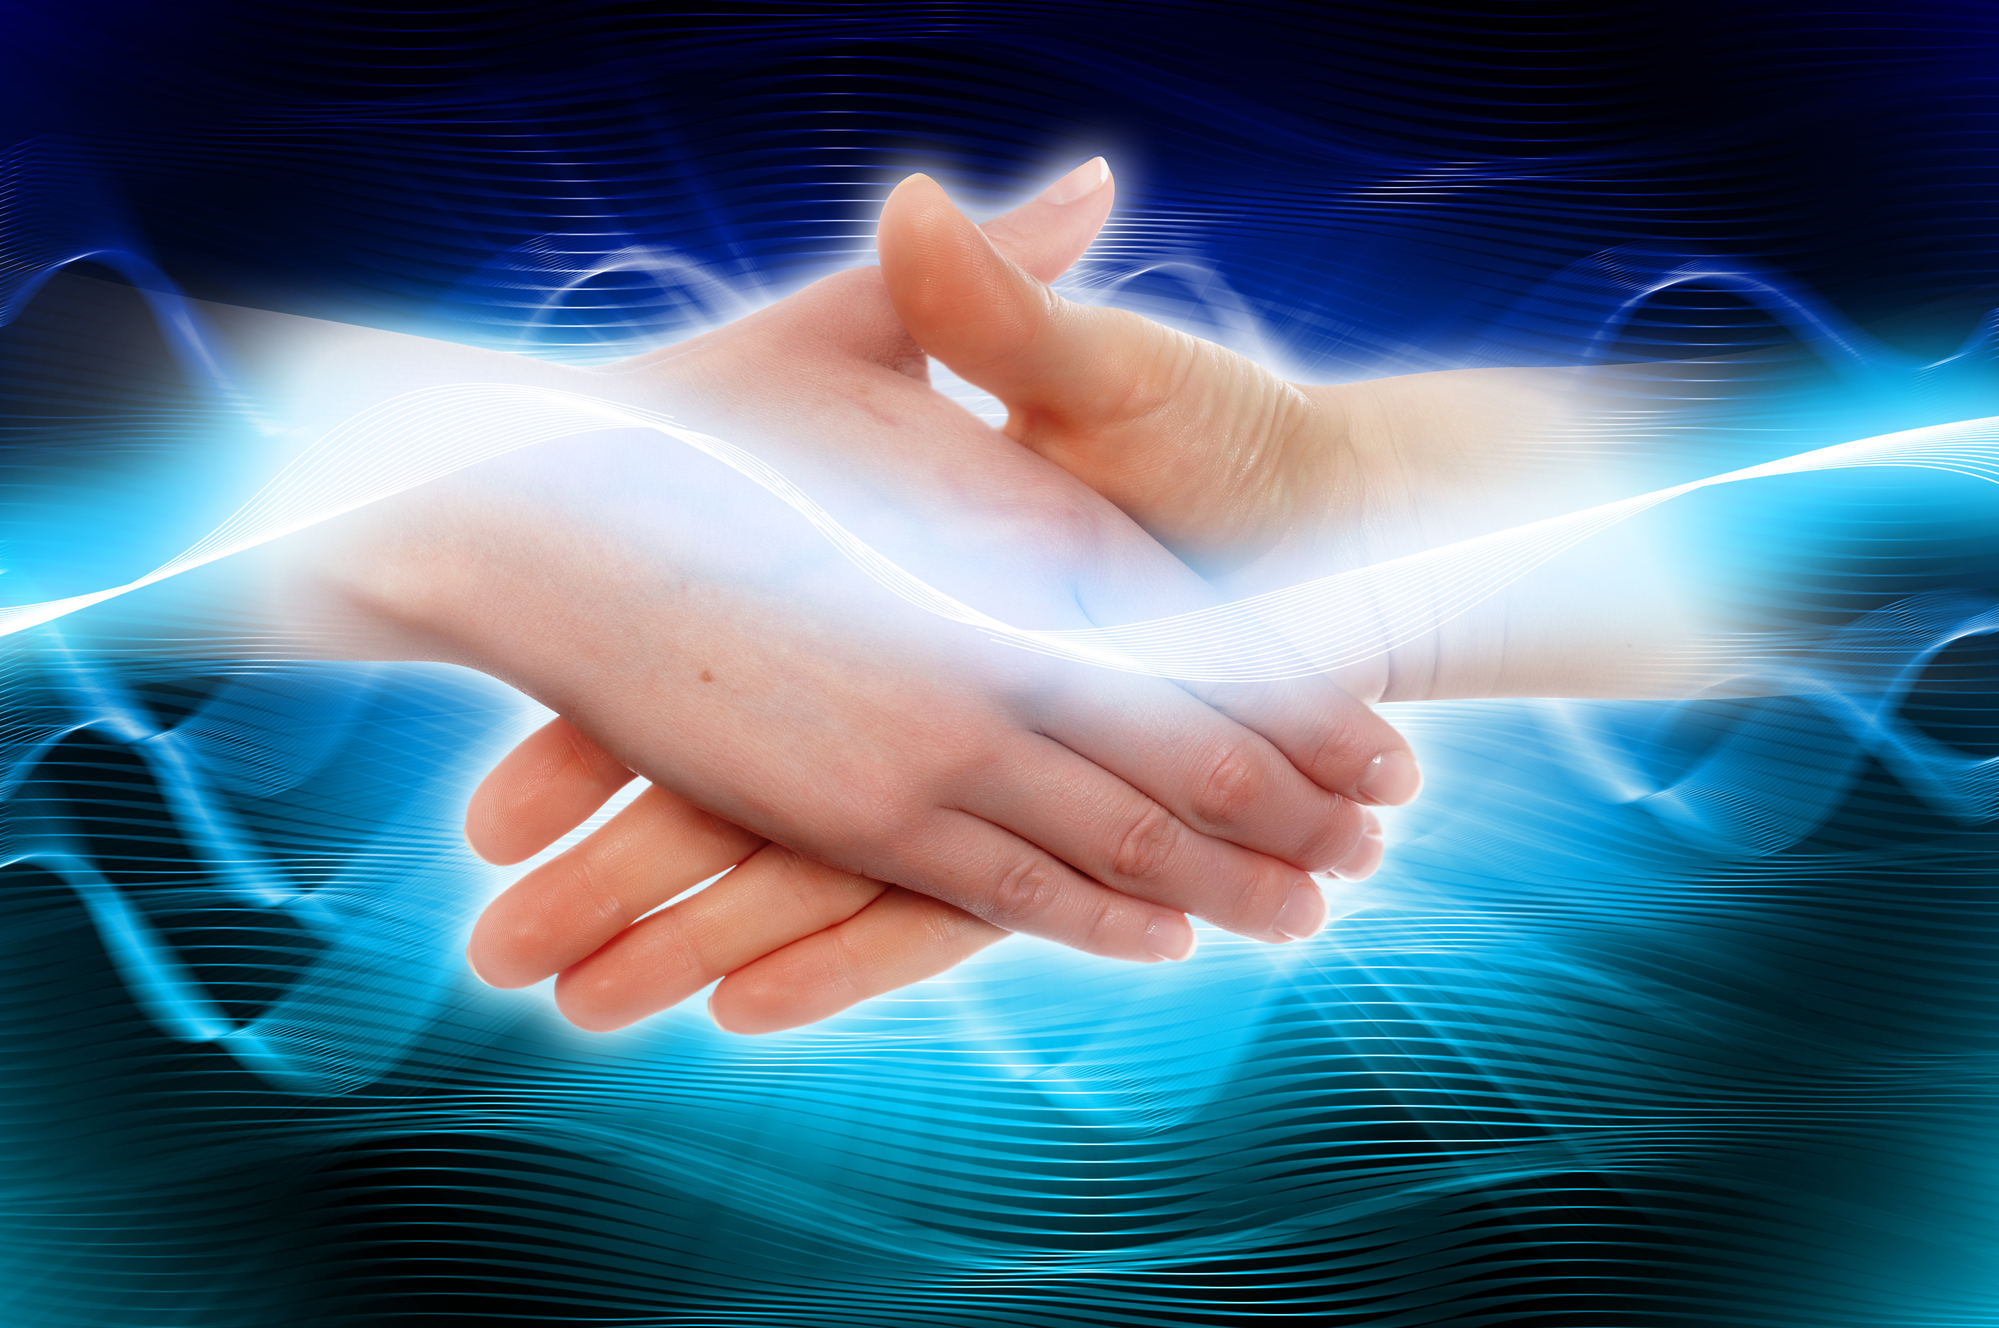 two hands shaking with a blue electrified energy around them depicting the energetic quality of two people meeting